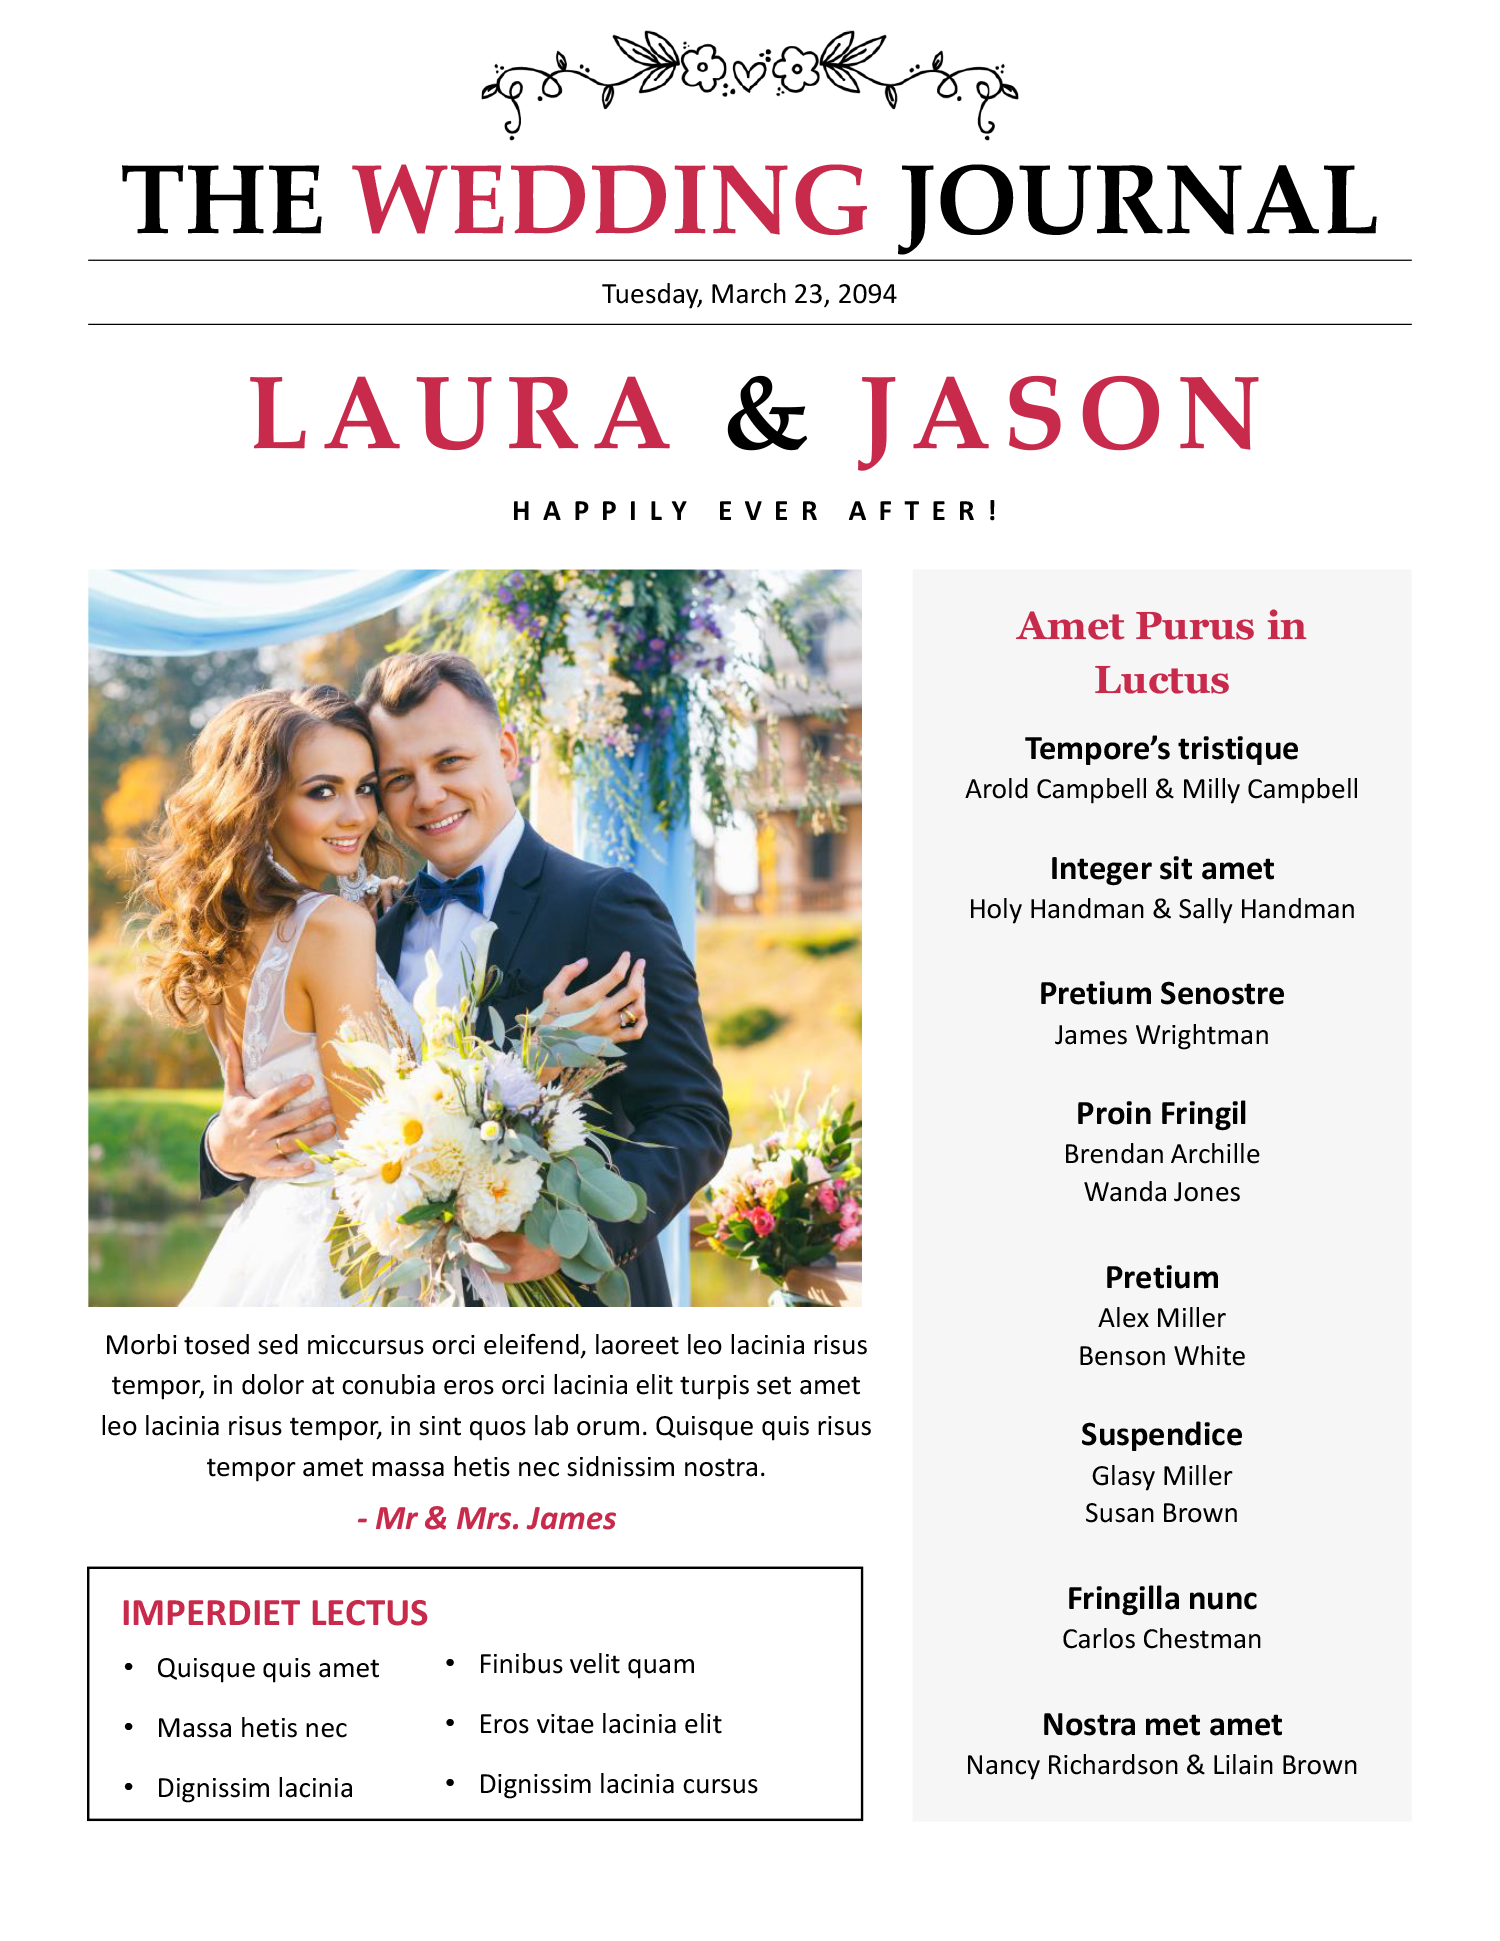 8.5x11 Newspaper Wedding Program Template - Front Page